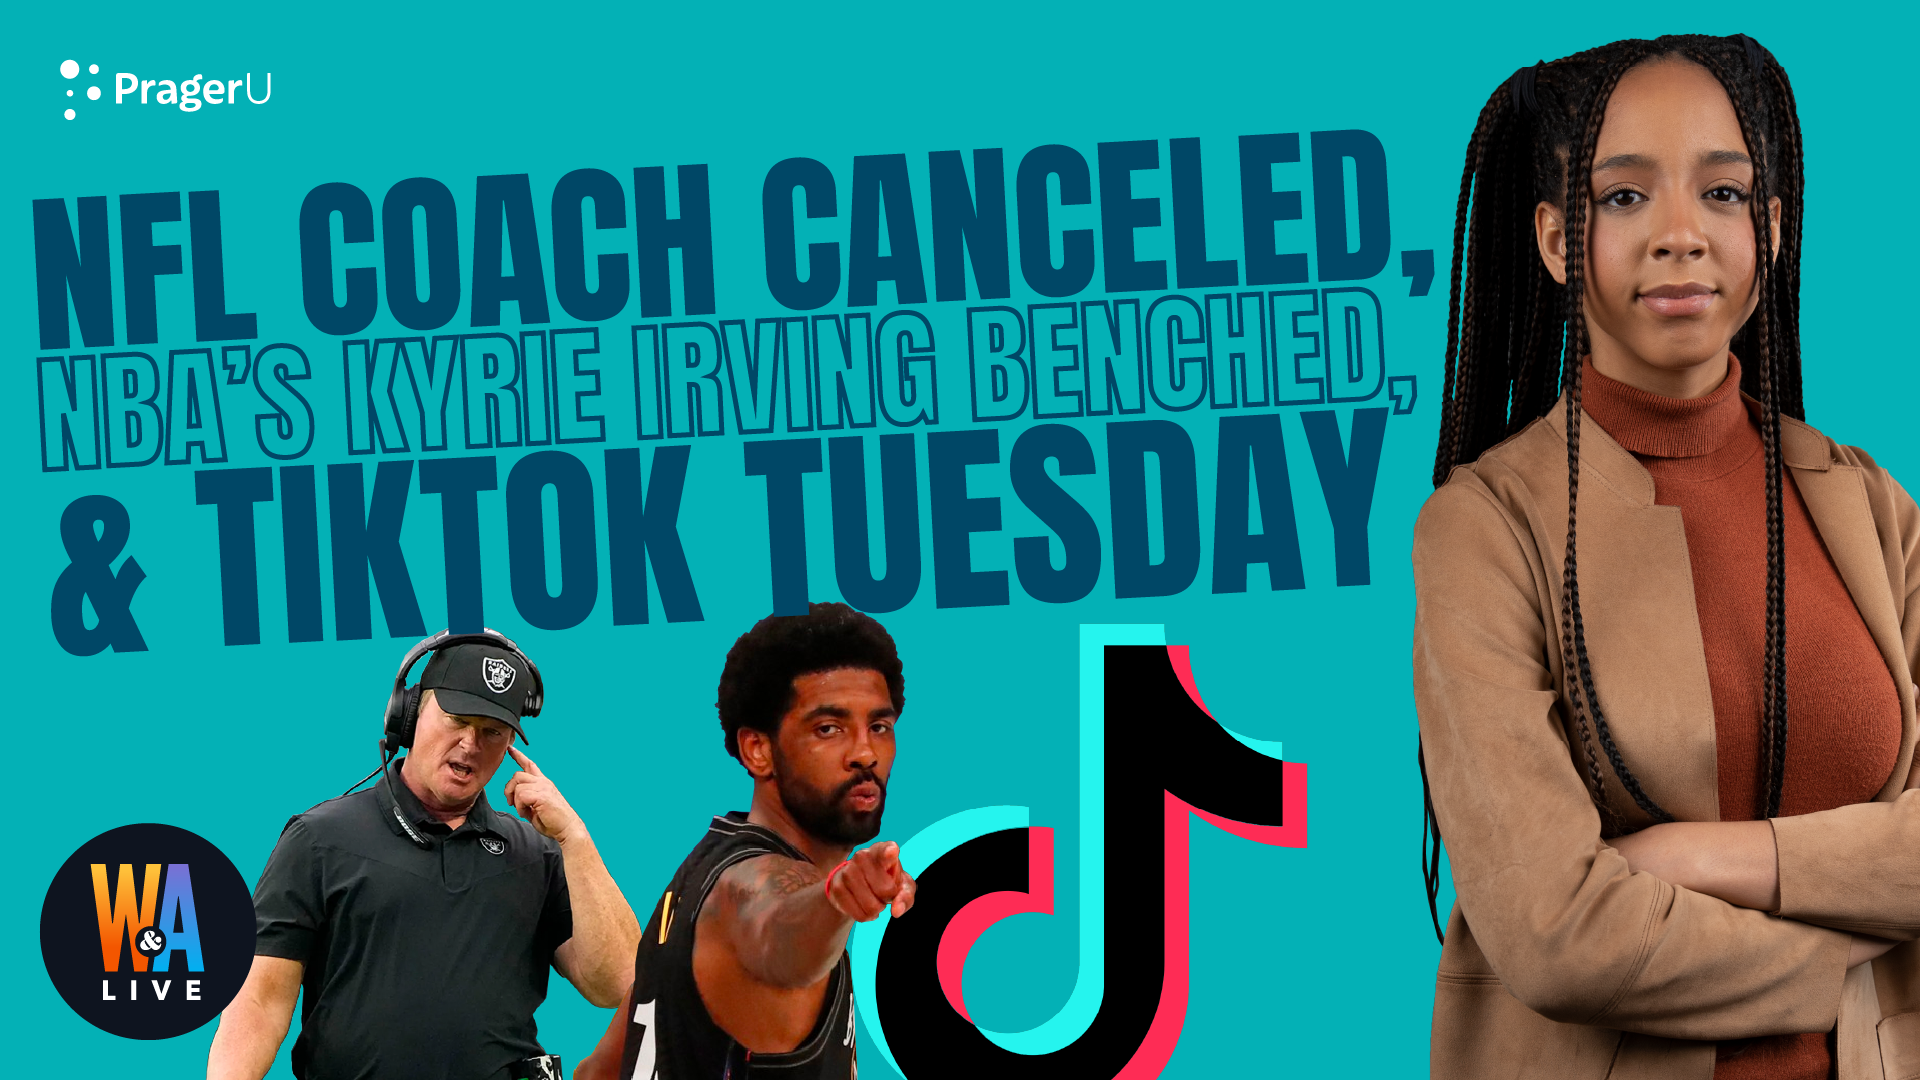 NFL Coach Canceled, NBA’s Kyrie Irving Benched, & Tiktok Tuesday: 10/12/2021